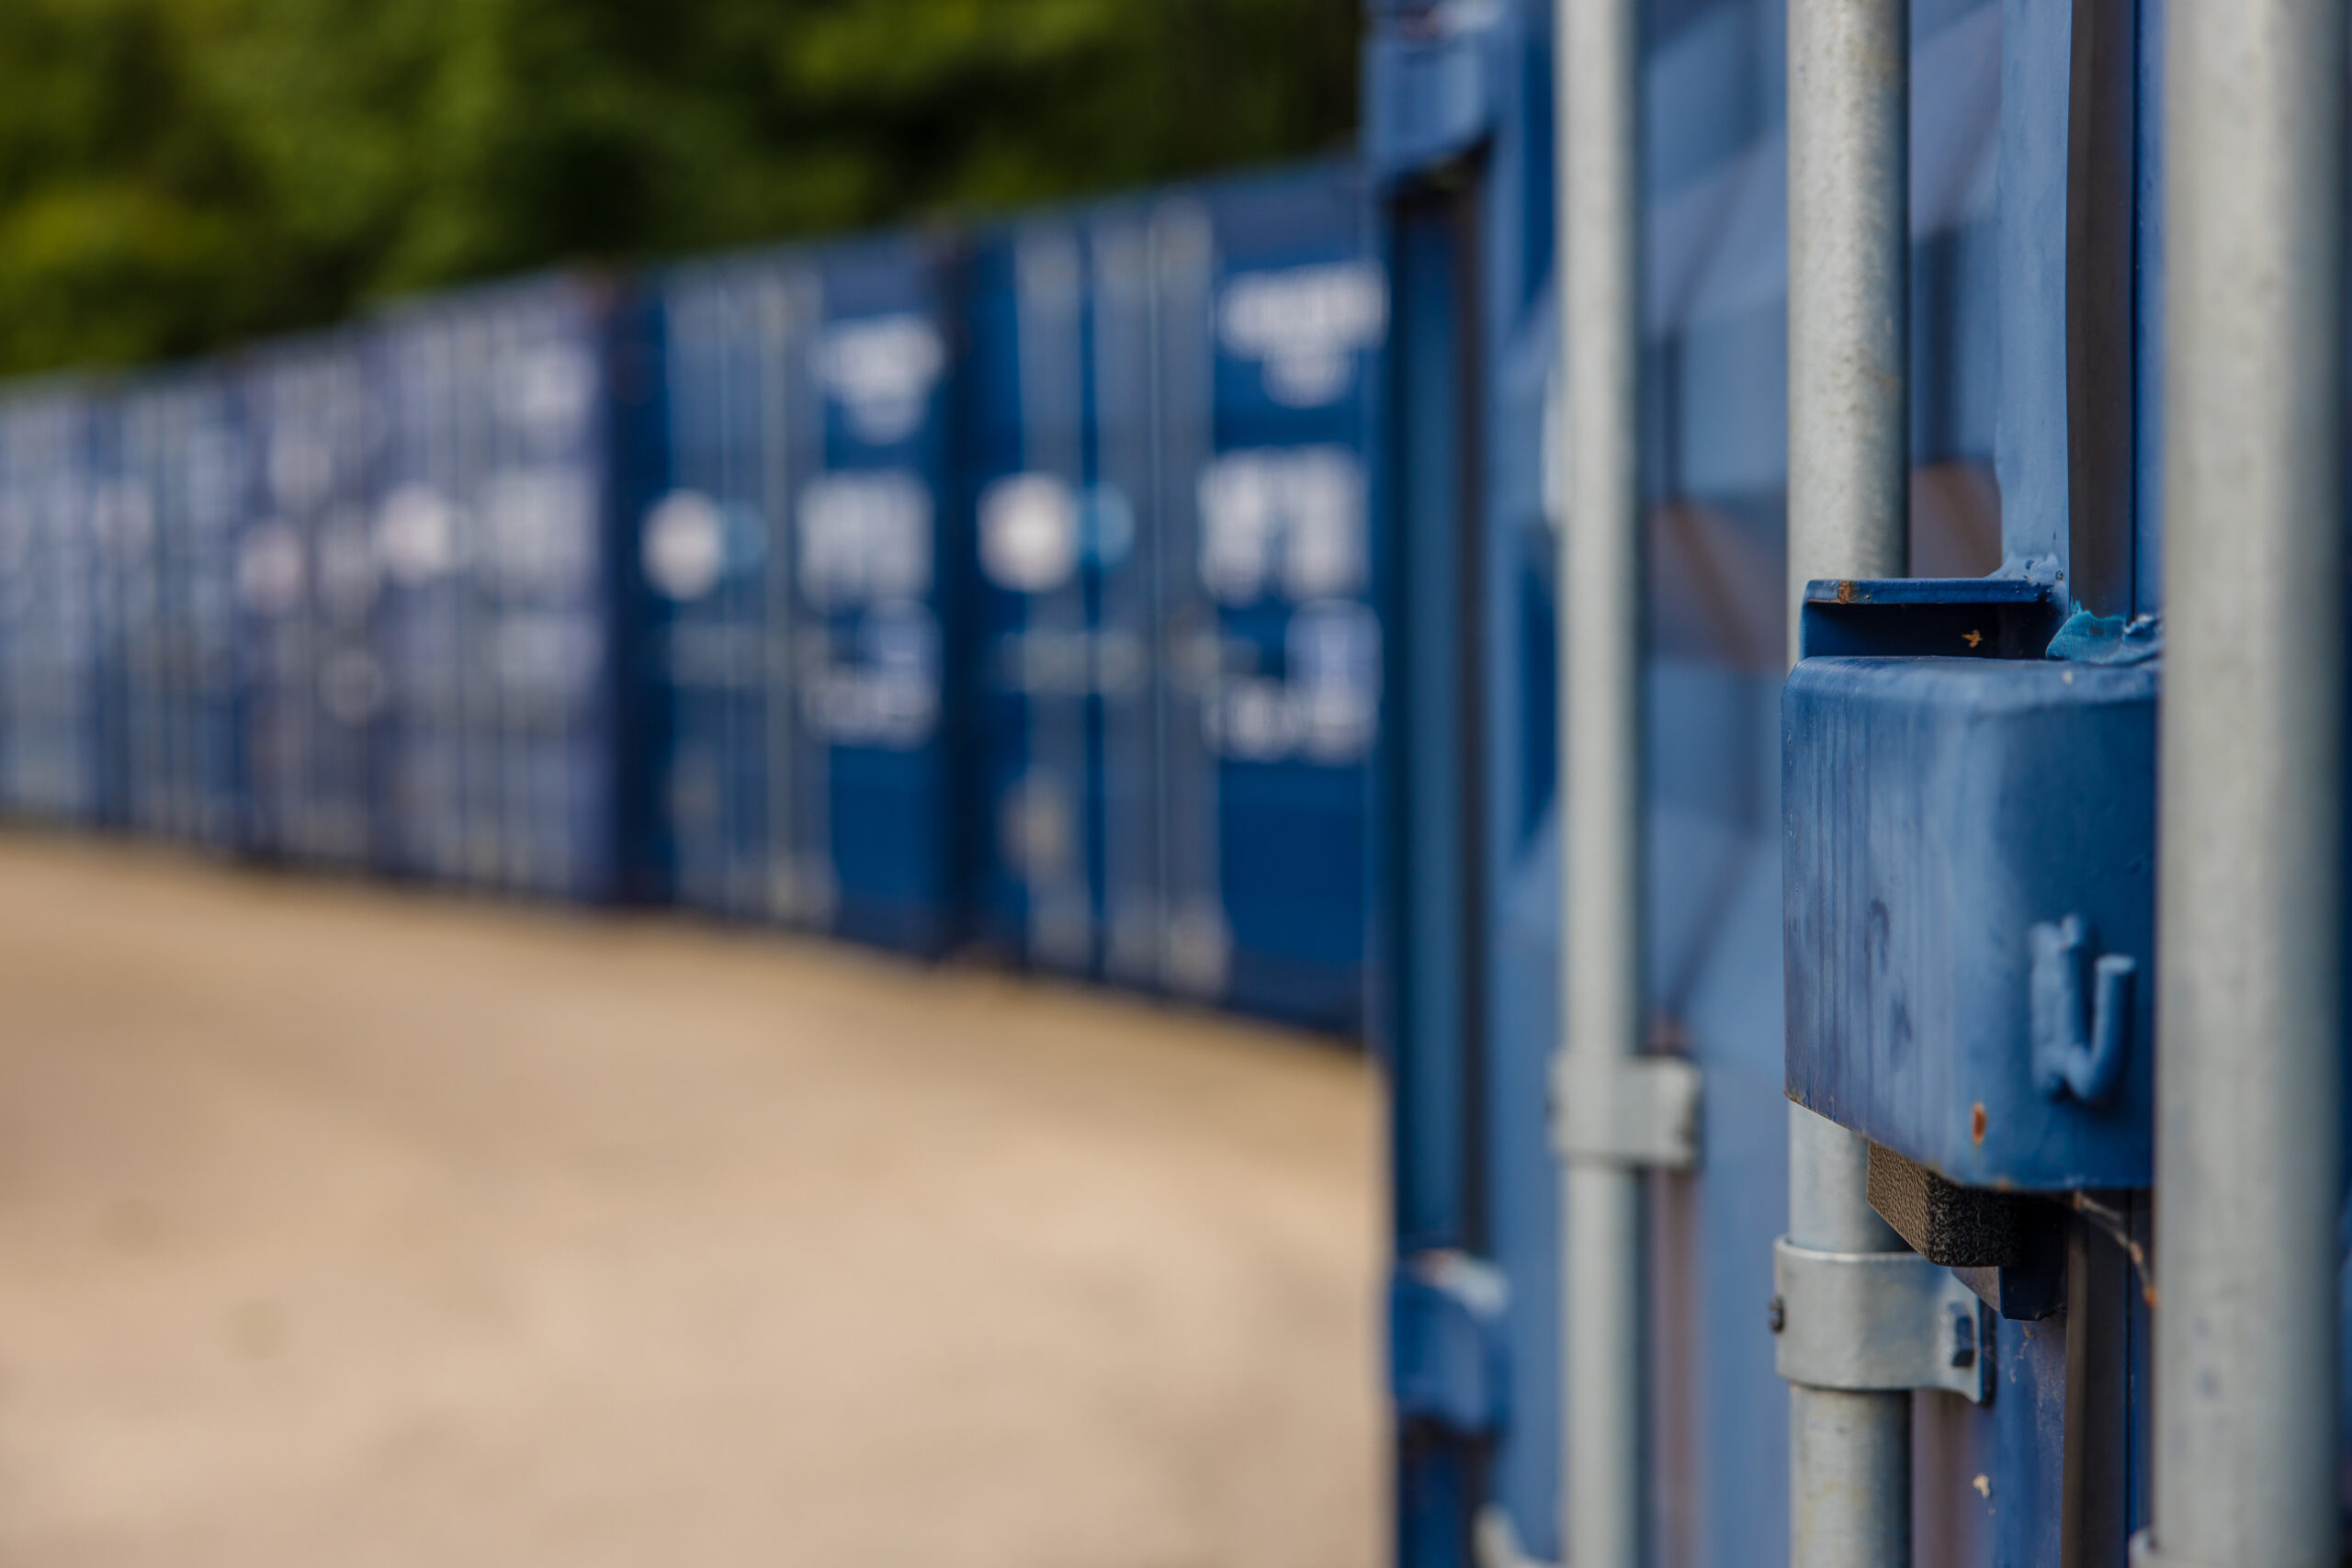 Close-up of blue storage container with locking mechanism, artistic shot with blurred containers in the background.